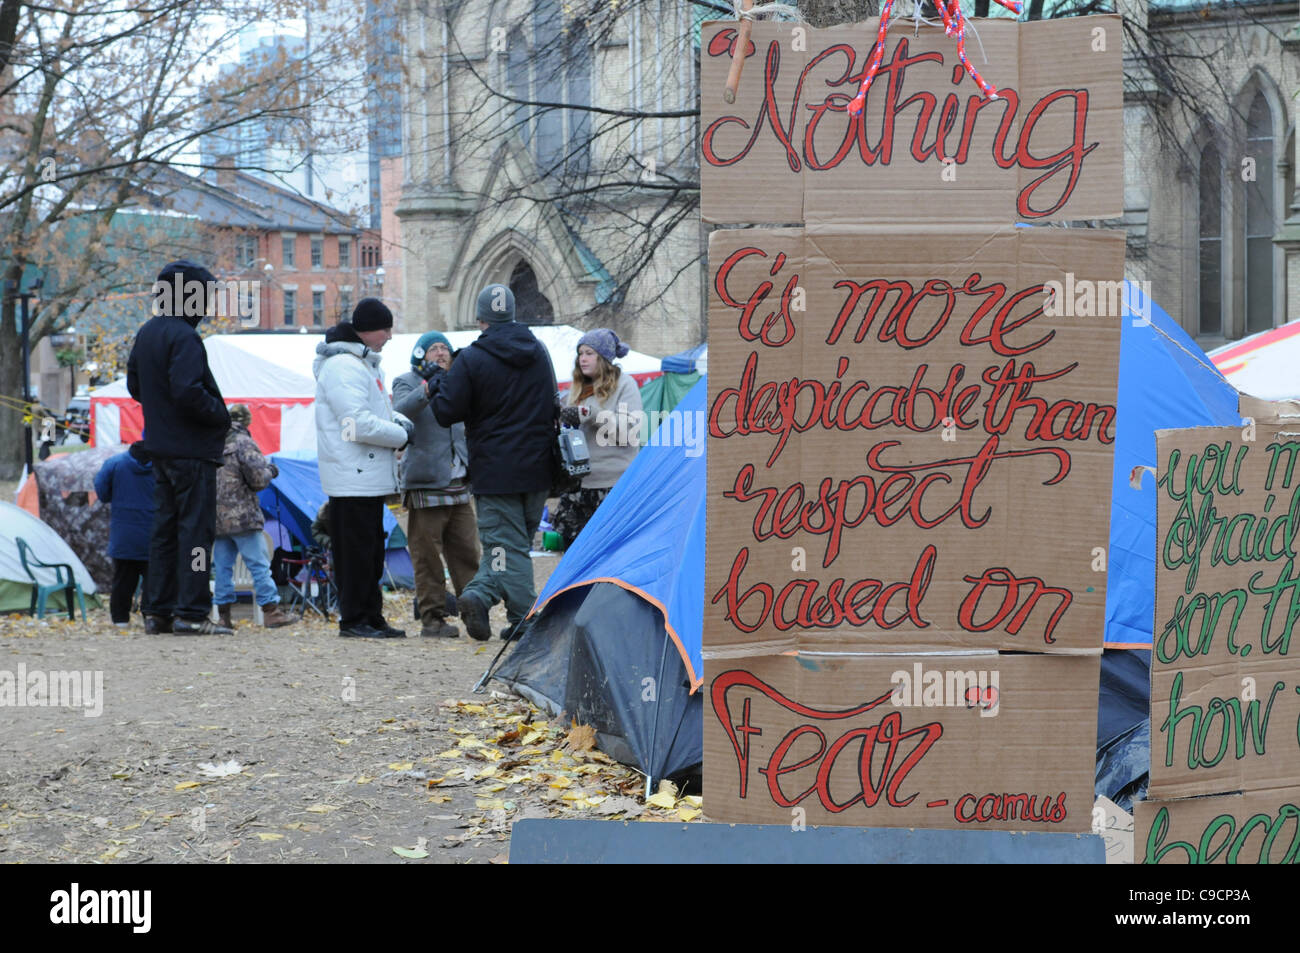 November 21, 2011, unidentified protesters discuss matters today at St. James Park Toronto following the decision handed down this morning by Ontario Superior Court judge David Brown, upholding the Occupy Toronto tent camp eviction.  A hand painted sign, right quotes Albert Camus. Stock Photo